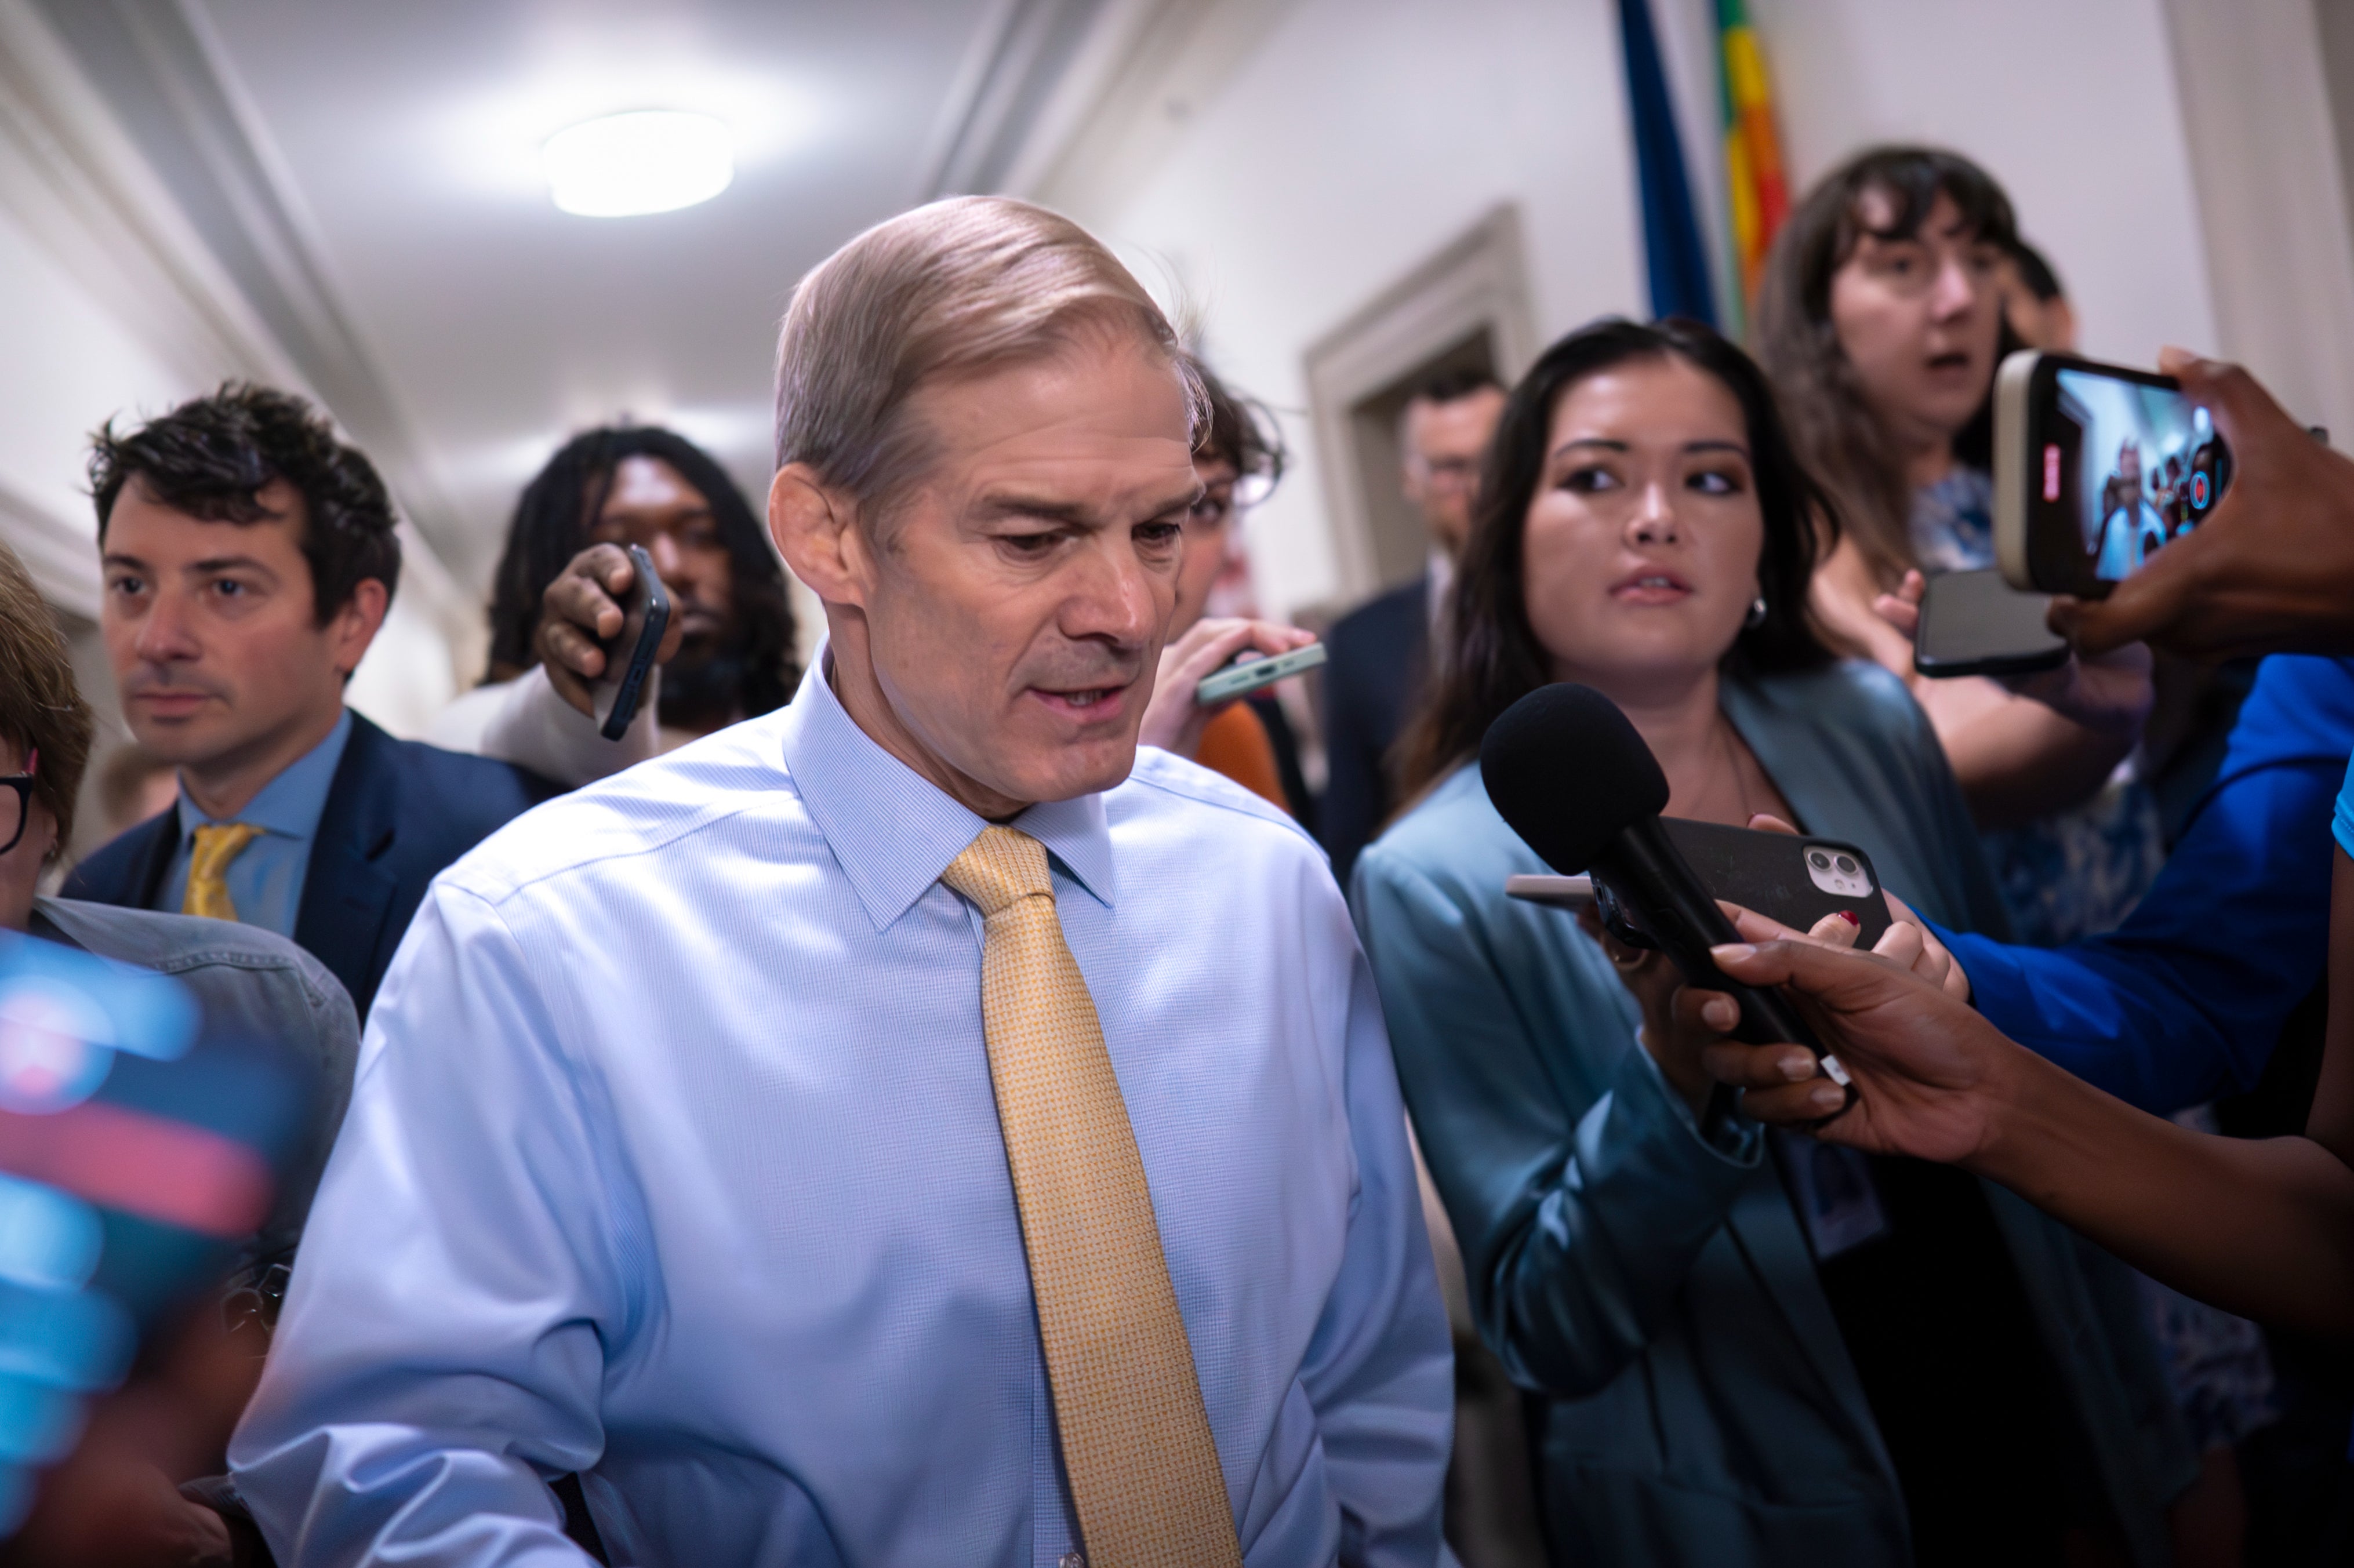 Rep. Jim Jordan, R-Ohio, chairman of the House Judiciary Committee and a staunch ally of former President Donald Trump, talks with reporters as House Republicans meet again behind closed doors to find a path to elect a new speaker